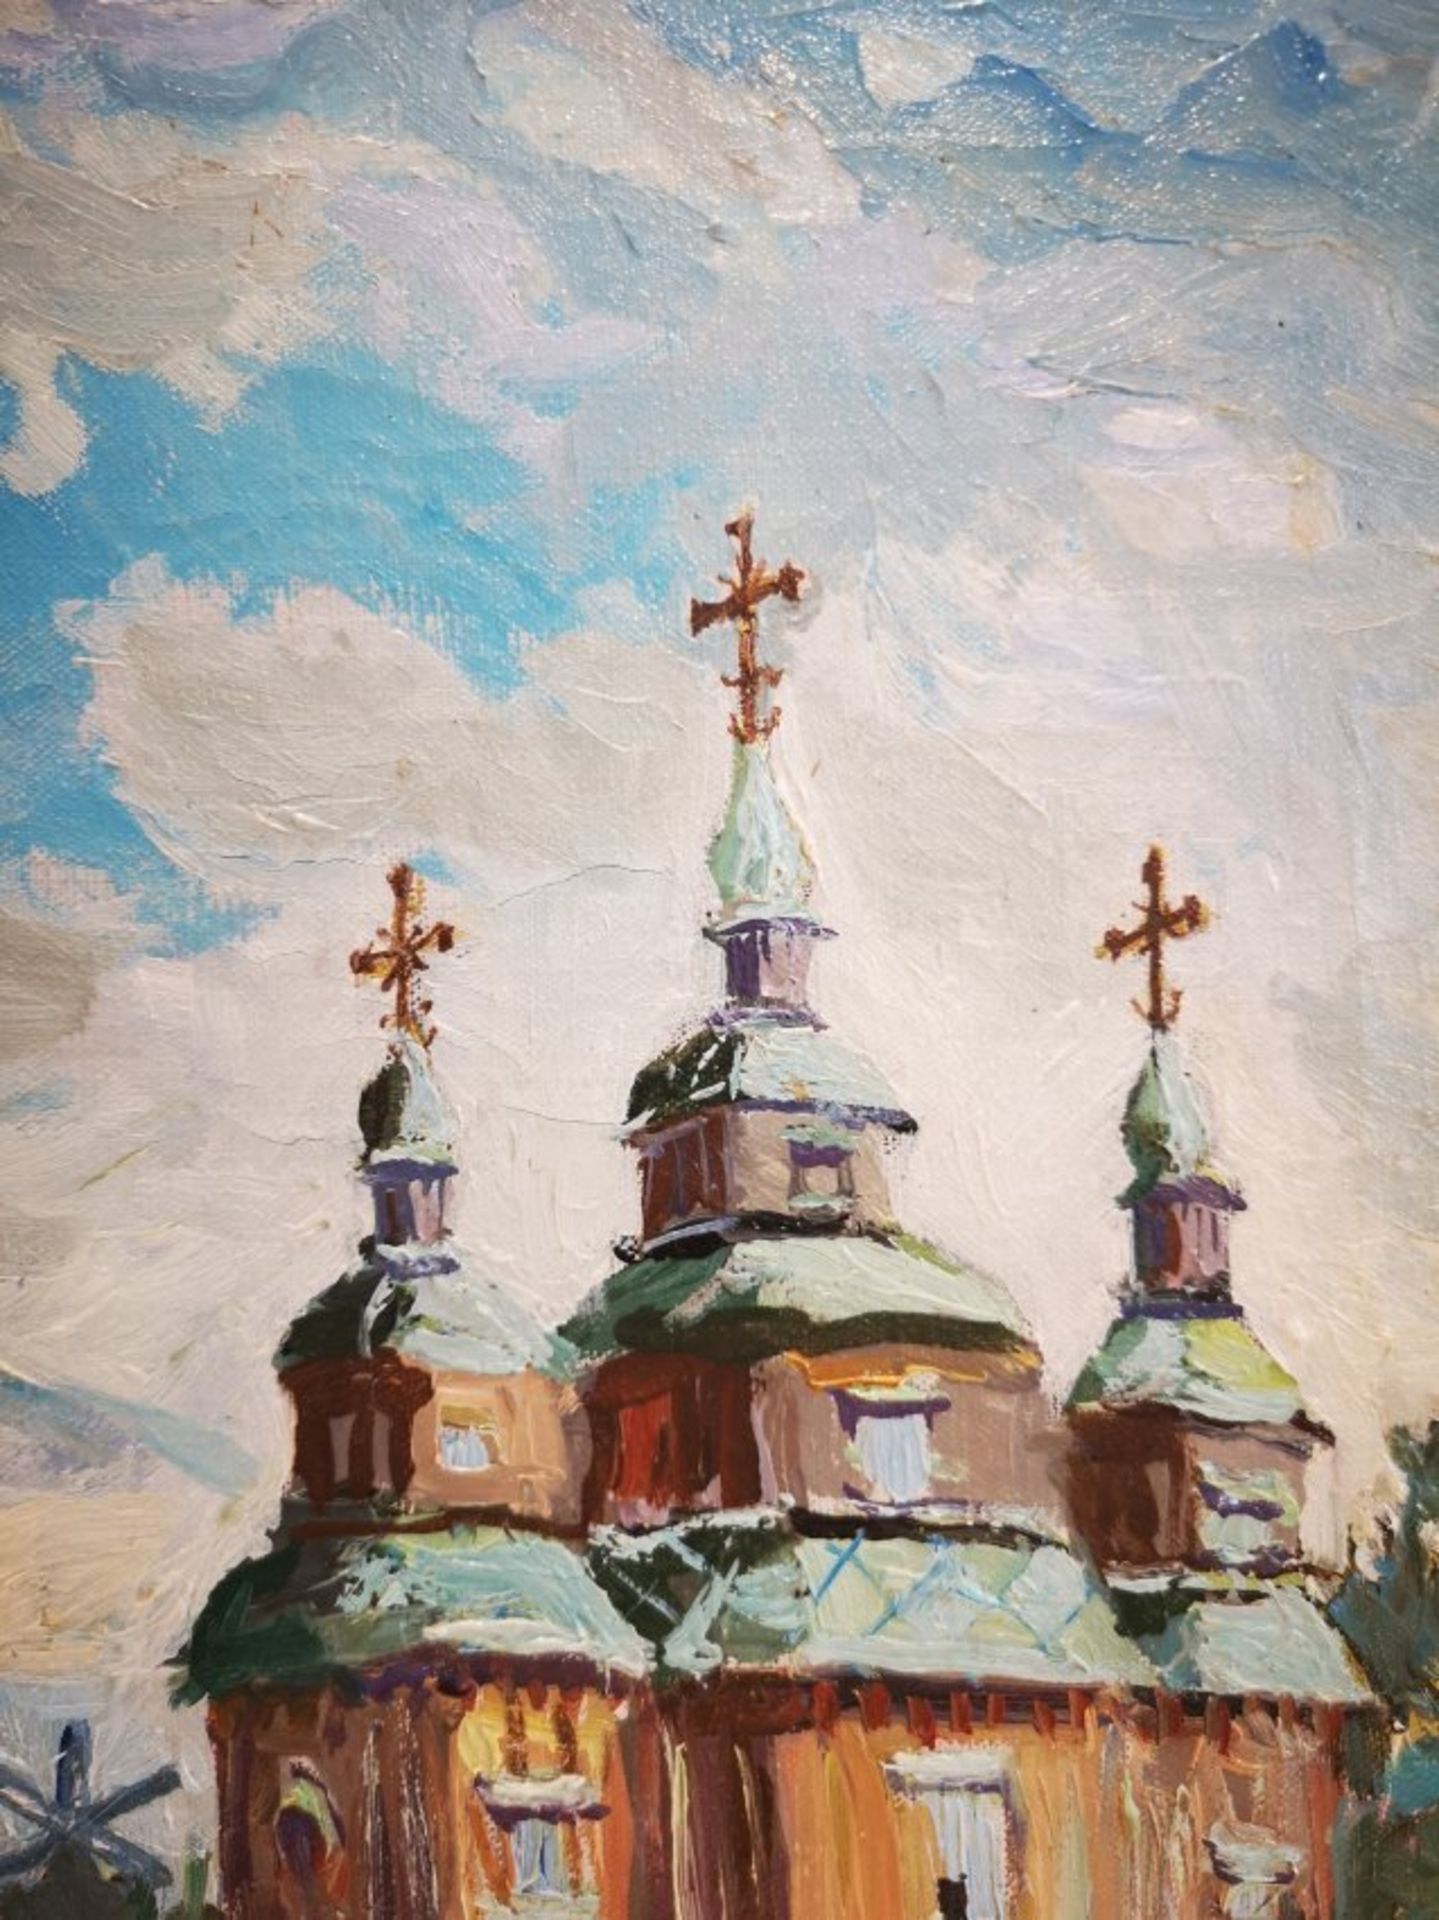 Russian Orthodox Church Kiev Pyrohovo Open-Air Museum - Image 2 of 5